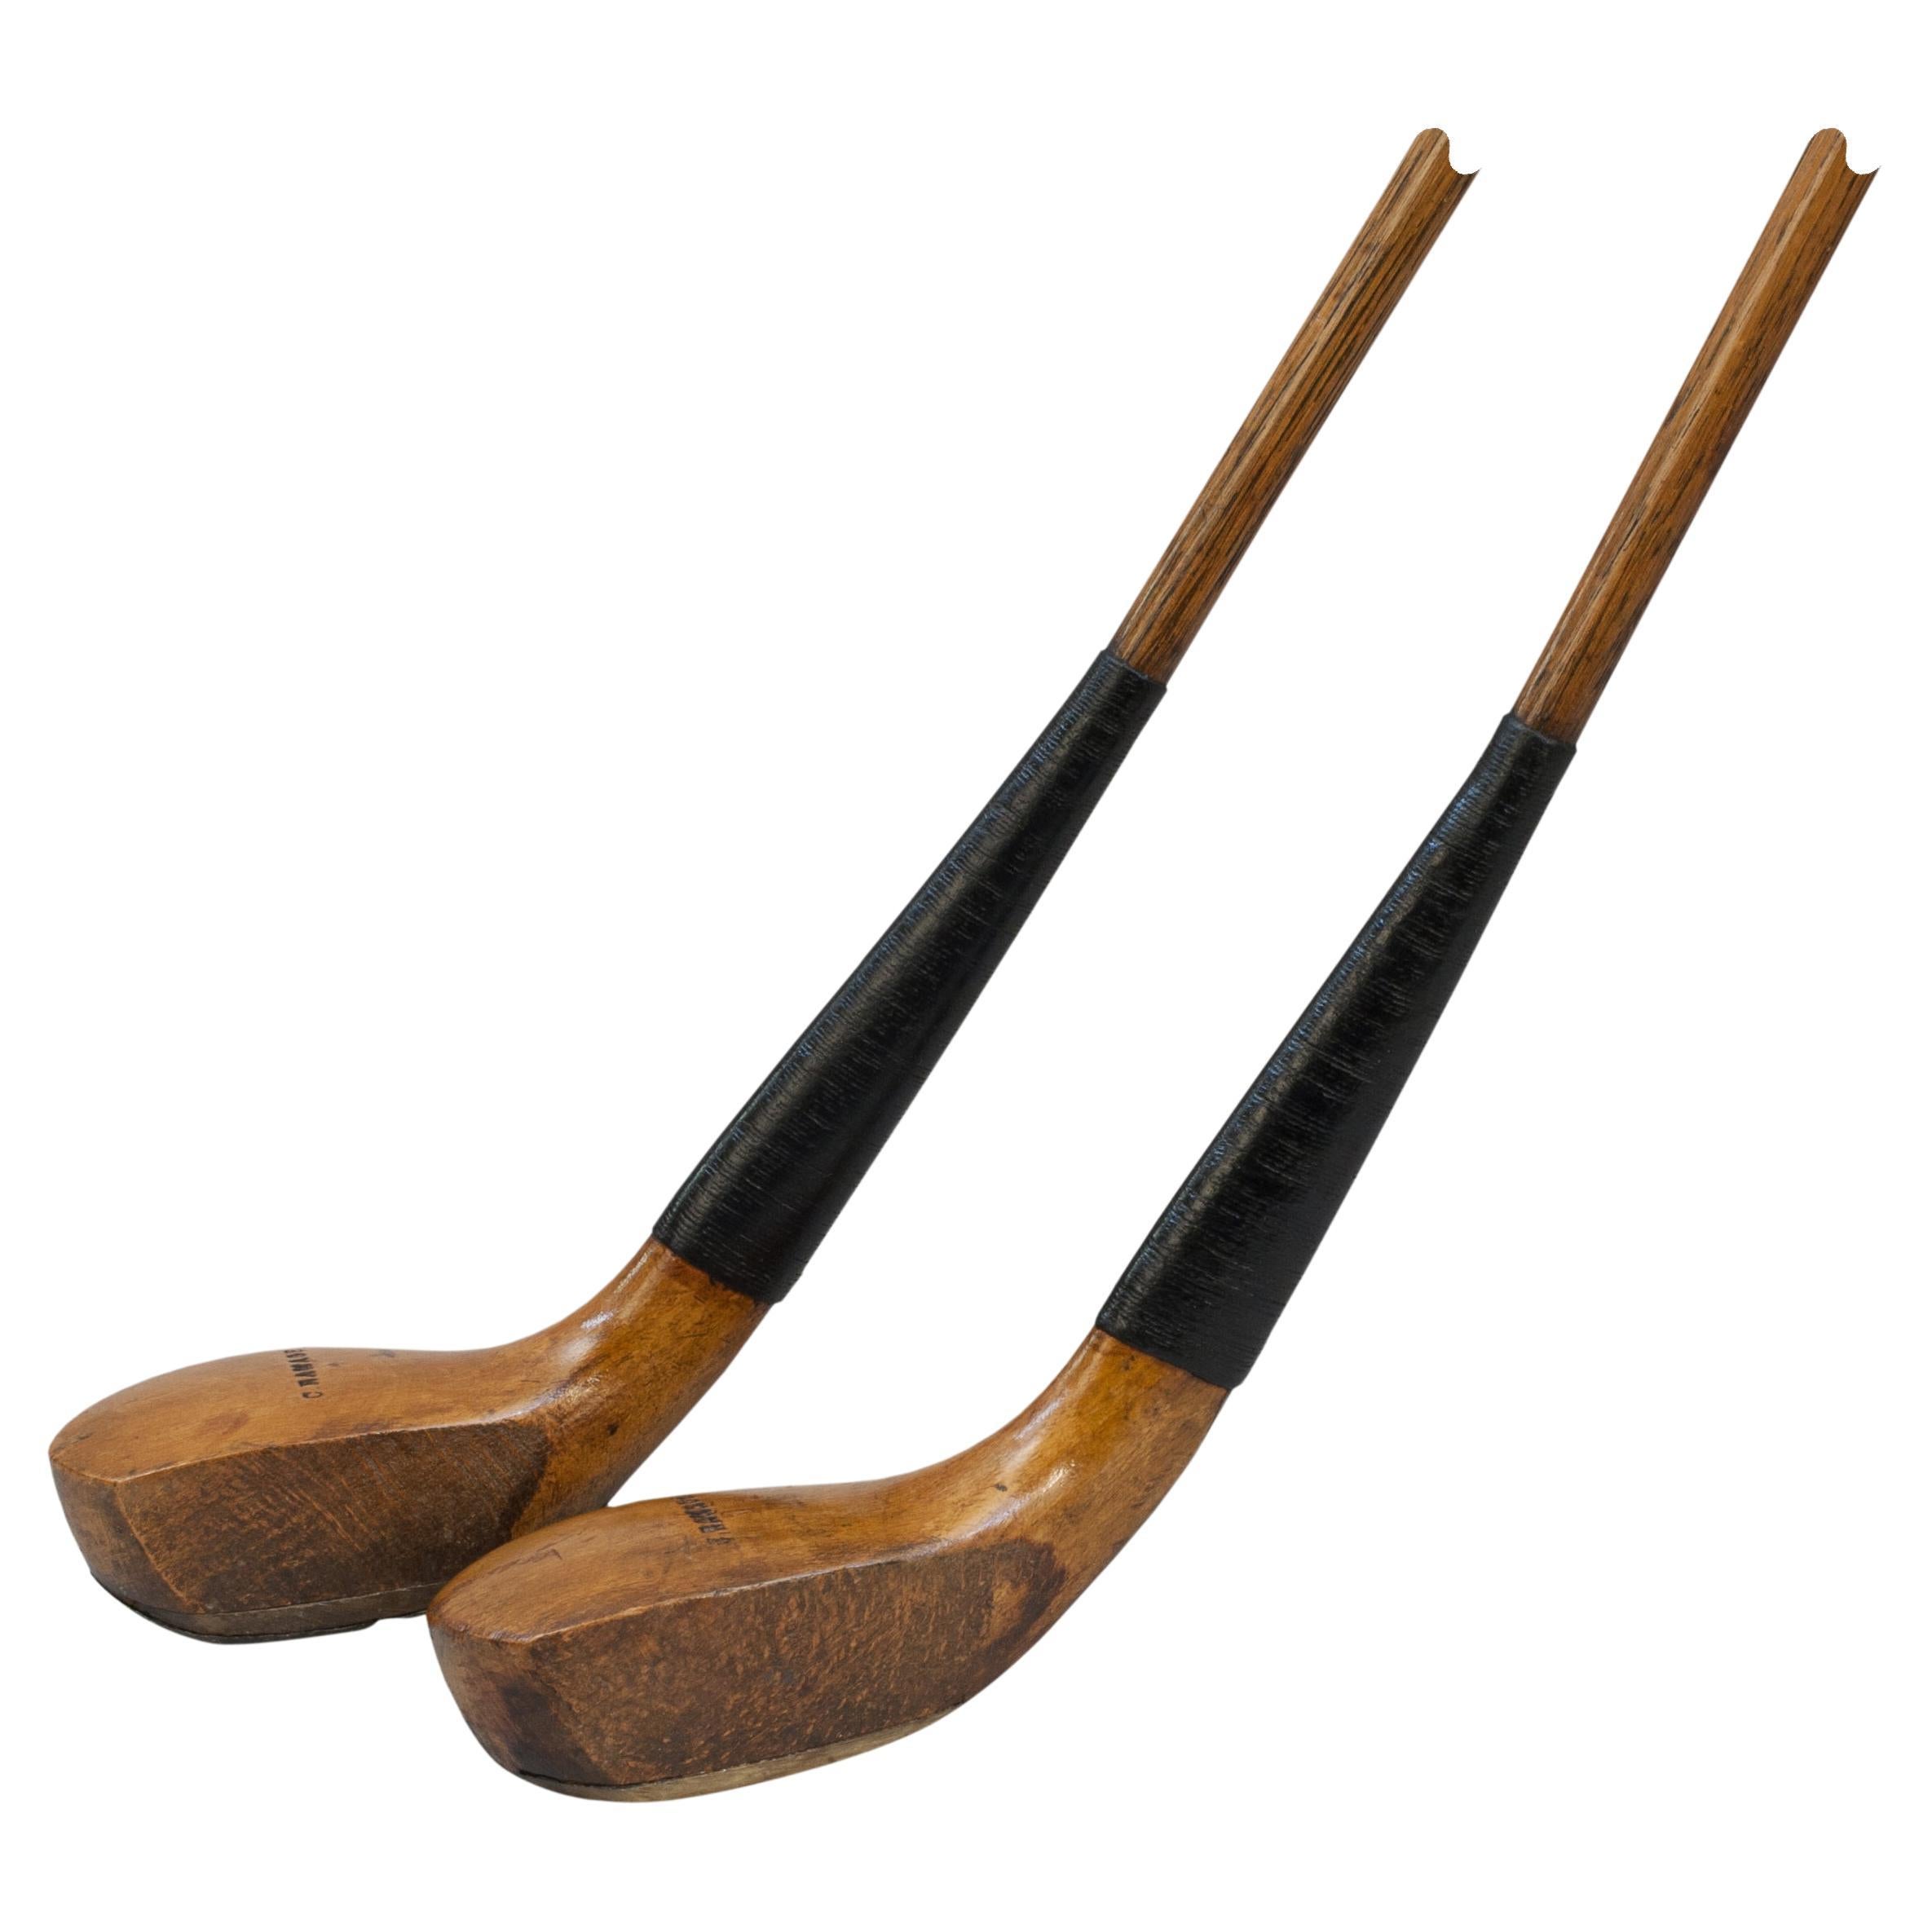 A Pair of Antique Transitional Long Nose Golf Clubs, Woods.